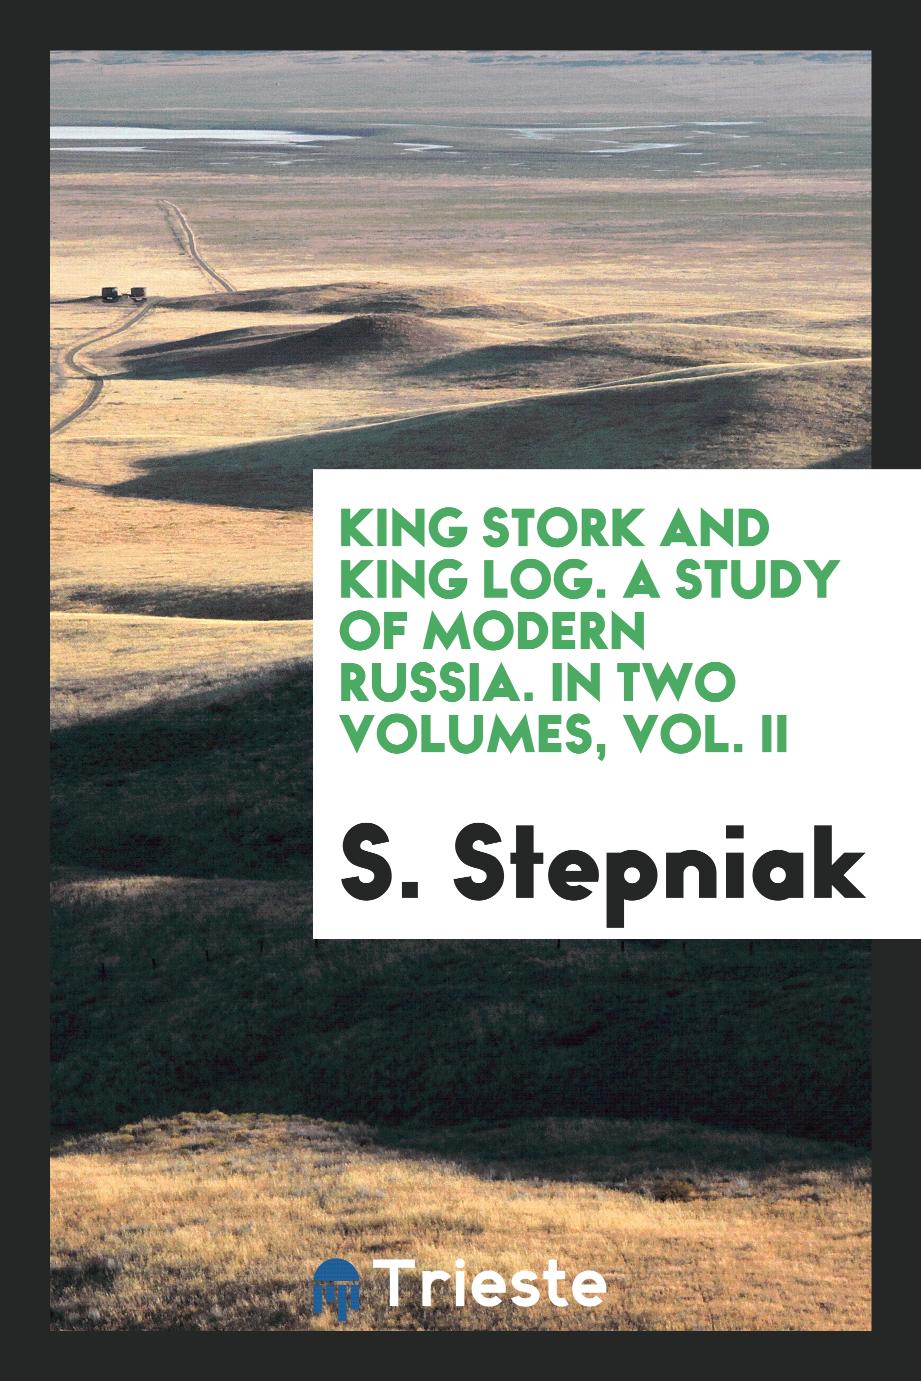 King Stork and King Log. A Study of Modern Russia. In Two Volumes, Vol. II